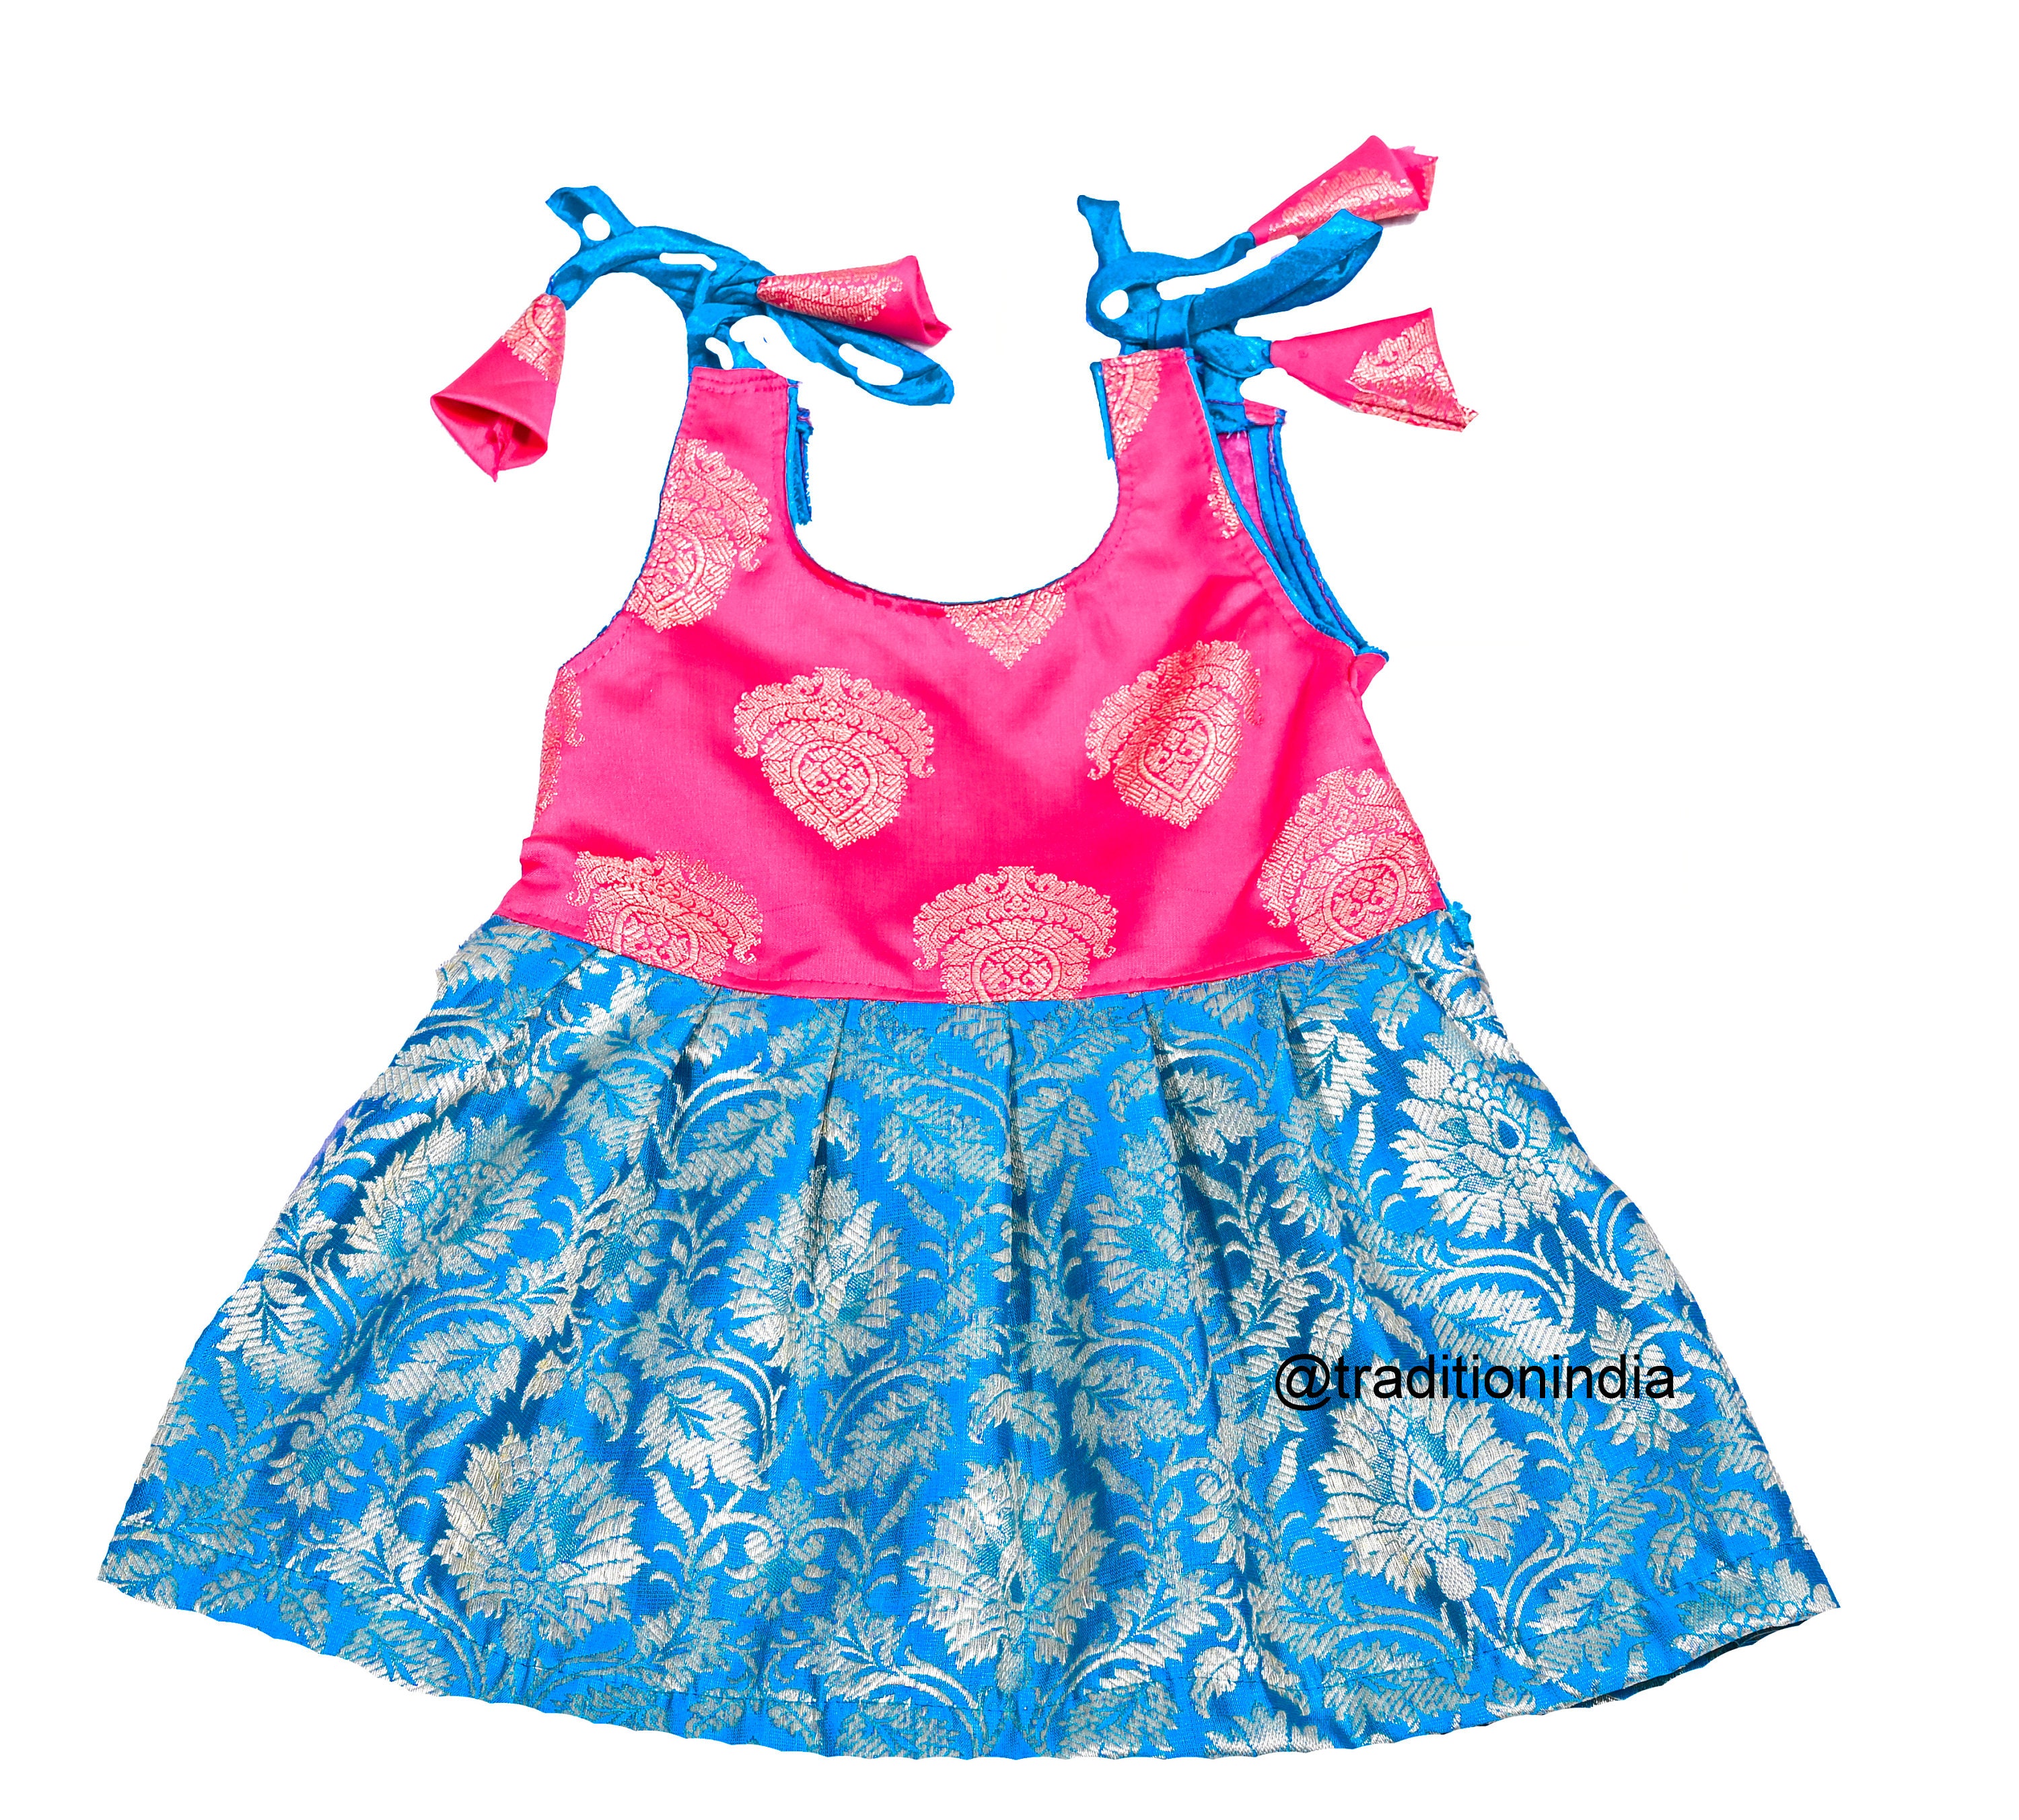 Children's Clothing 10 Year Old Girl | Children's Clothing 8 10 Years Old -  Girls - Aliexpress